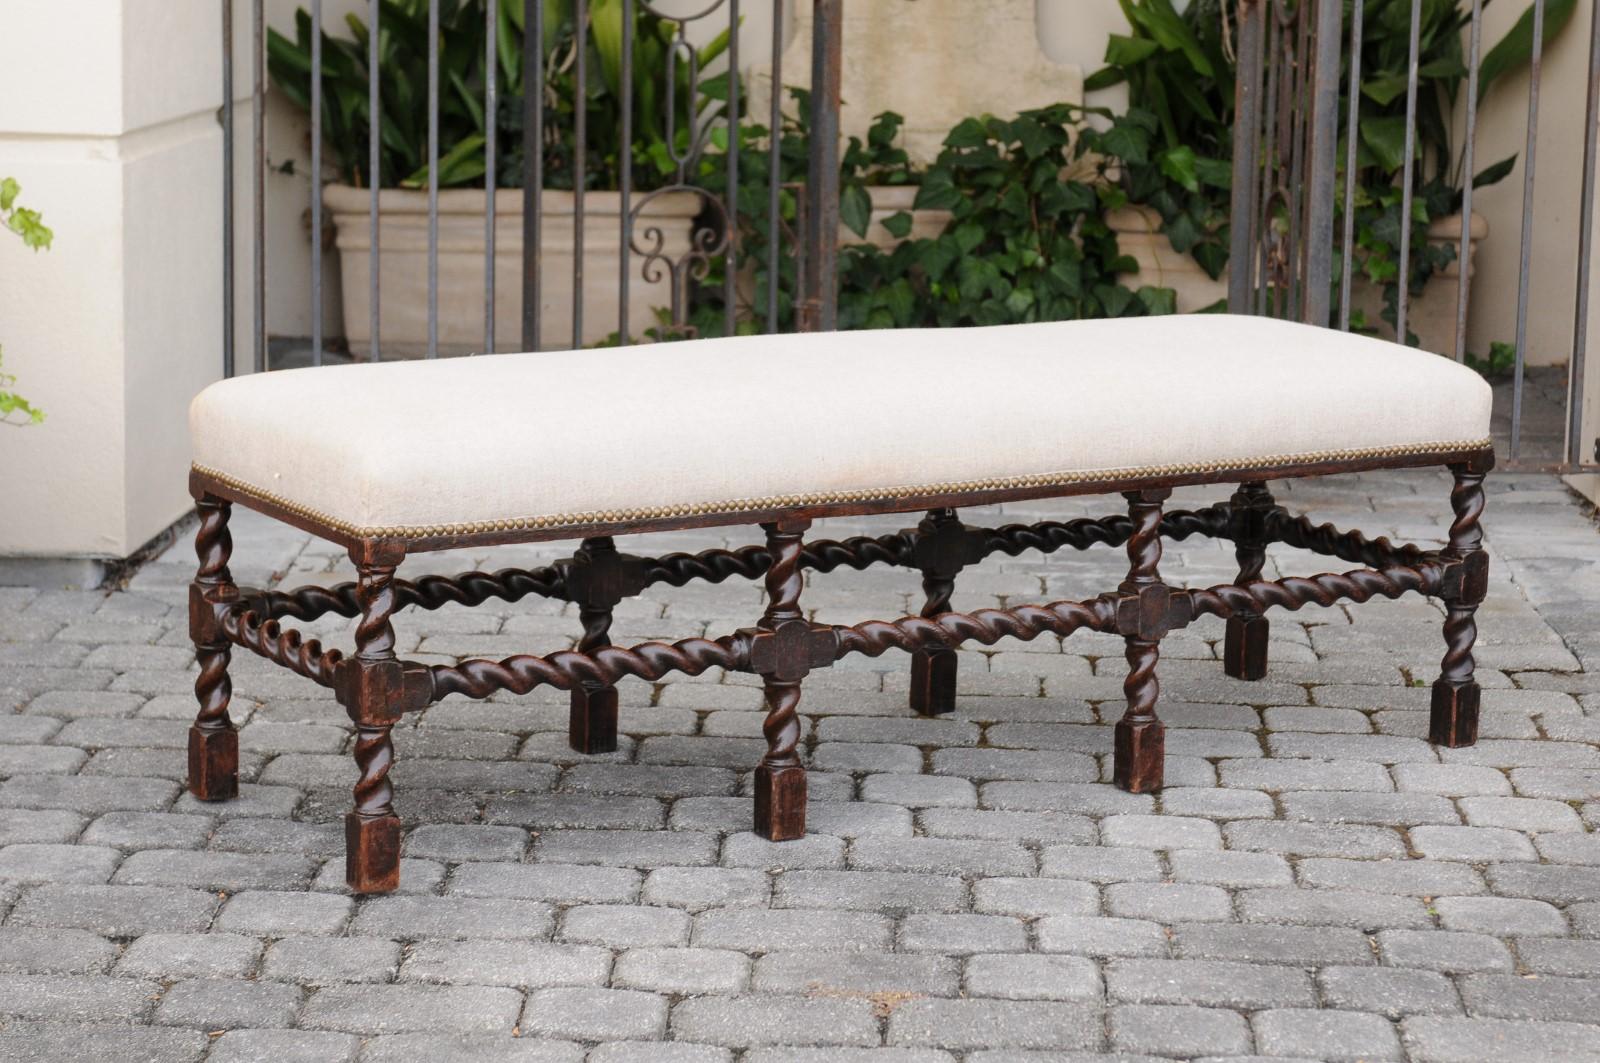 An English oak bench from the late 19th century, with barley twist base, dark patina and new upholstery. Born in England during the last quarter of the 19th century, this exquisite oak bench features a long rectangular seat covered with a linen